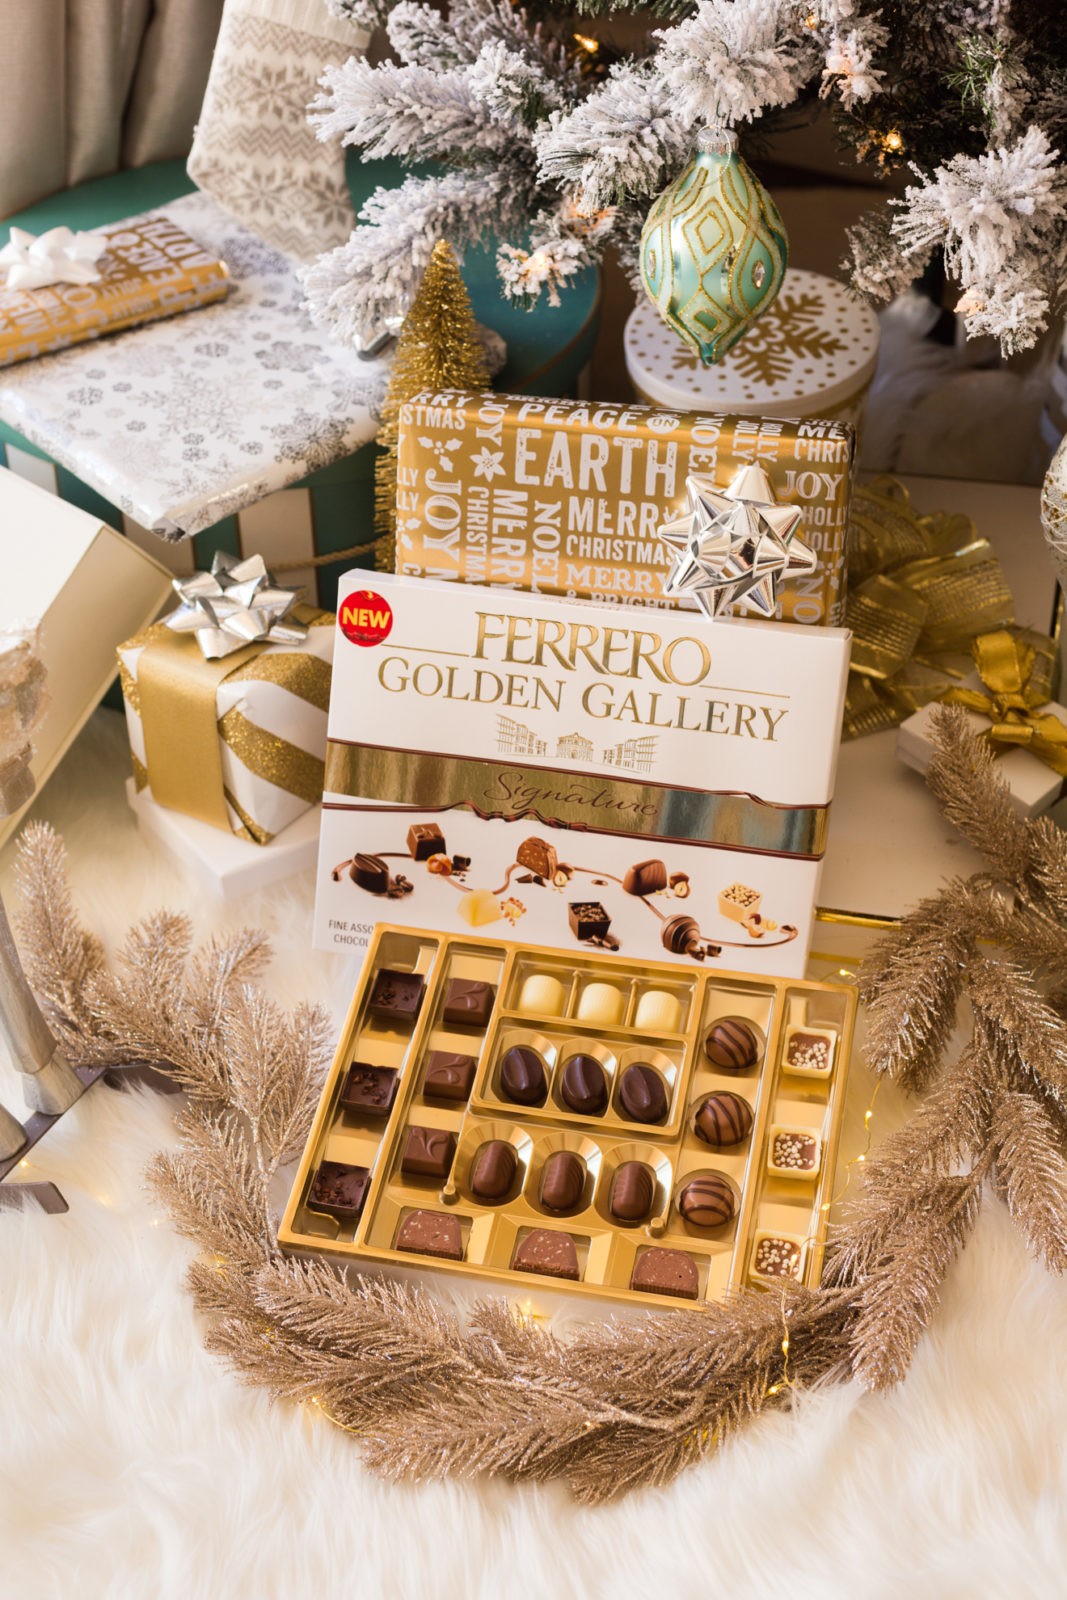 The Perfect Gift for Everyone, Ferrero Golden Gallery Signature Chocolates by Lifestyle Blogger Laura Lily | Ferrero Golden Gallery: The Perfect Holiday Gift for Everyone by popular Los Angeles life and style blogger, Laura Lily: image of wrapped presents and an open box of Ferrero Golden Gallery chocolates under a Christmas tree.